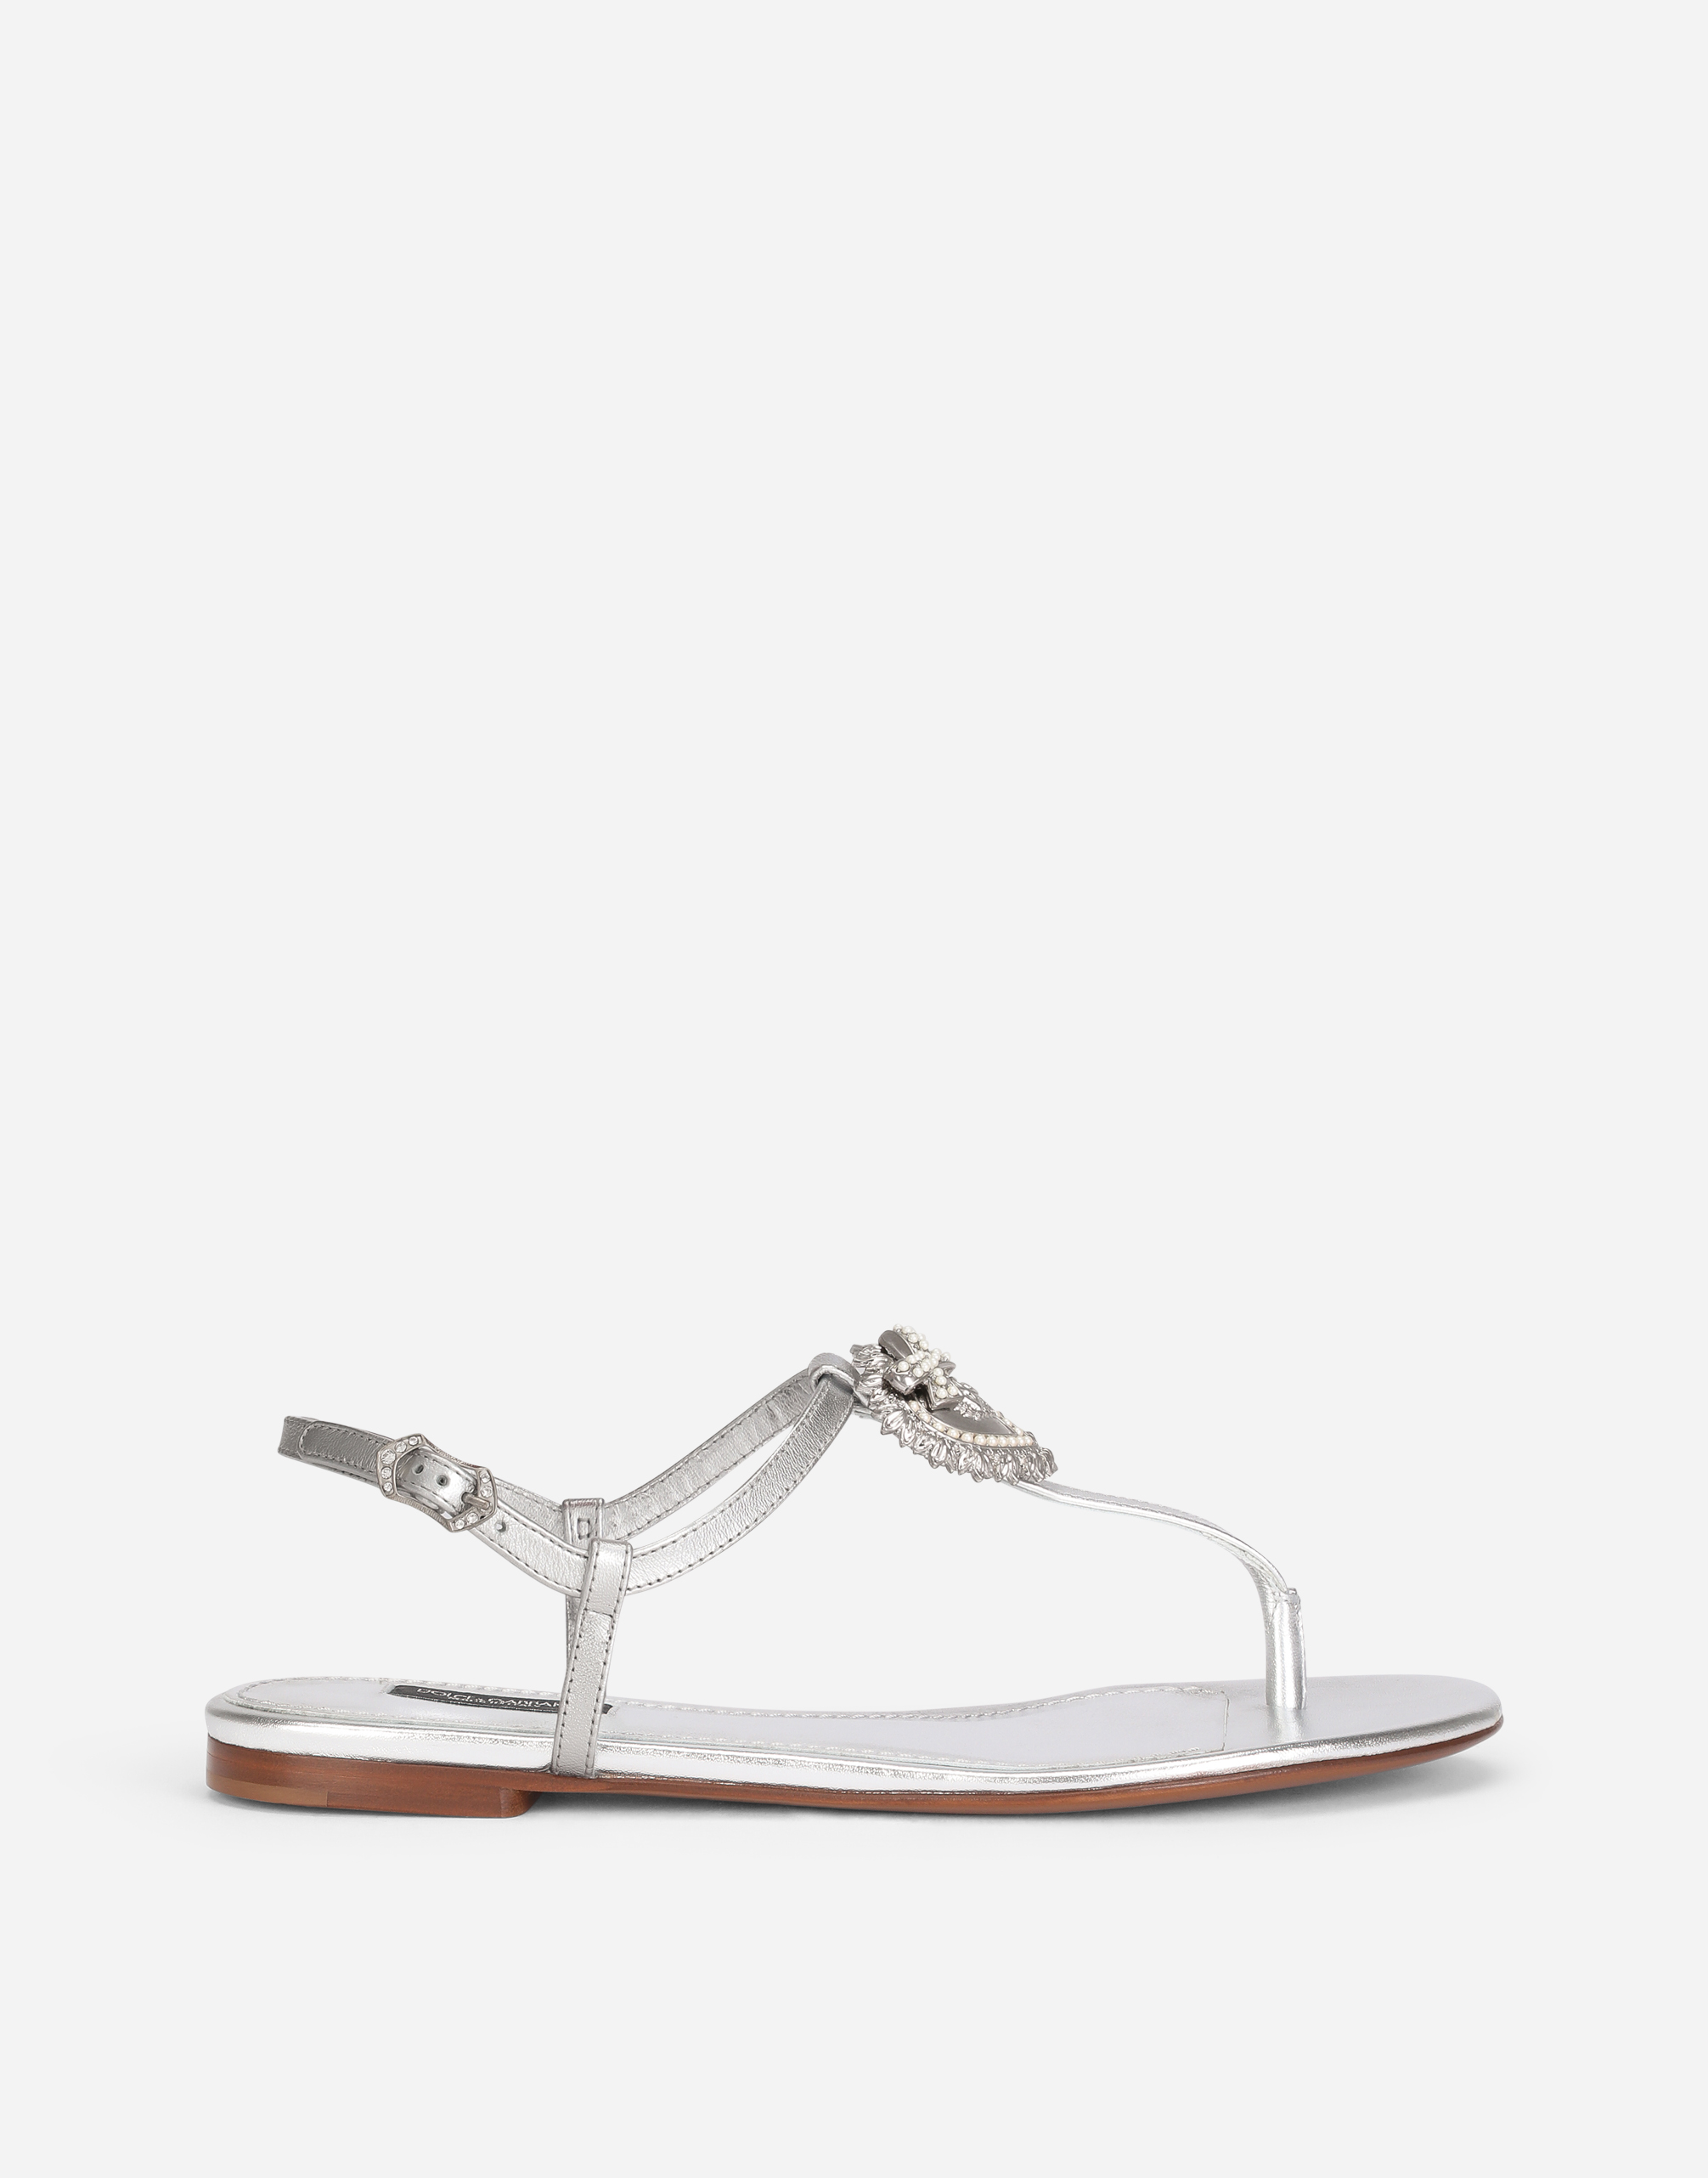 Nappa leather Devotion thong sandals in Silver